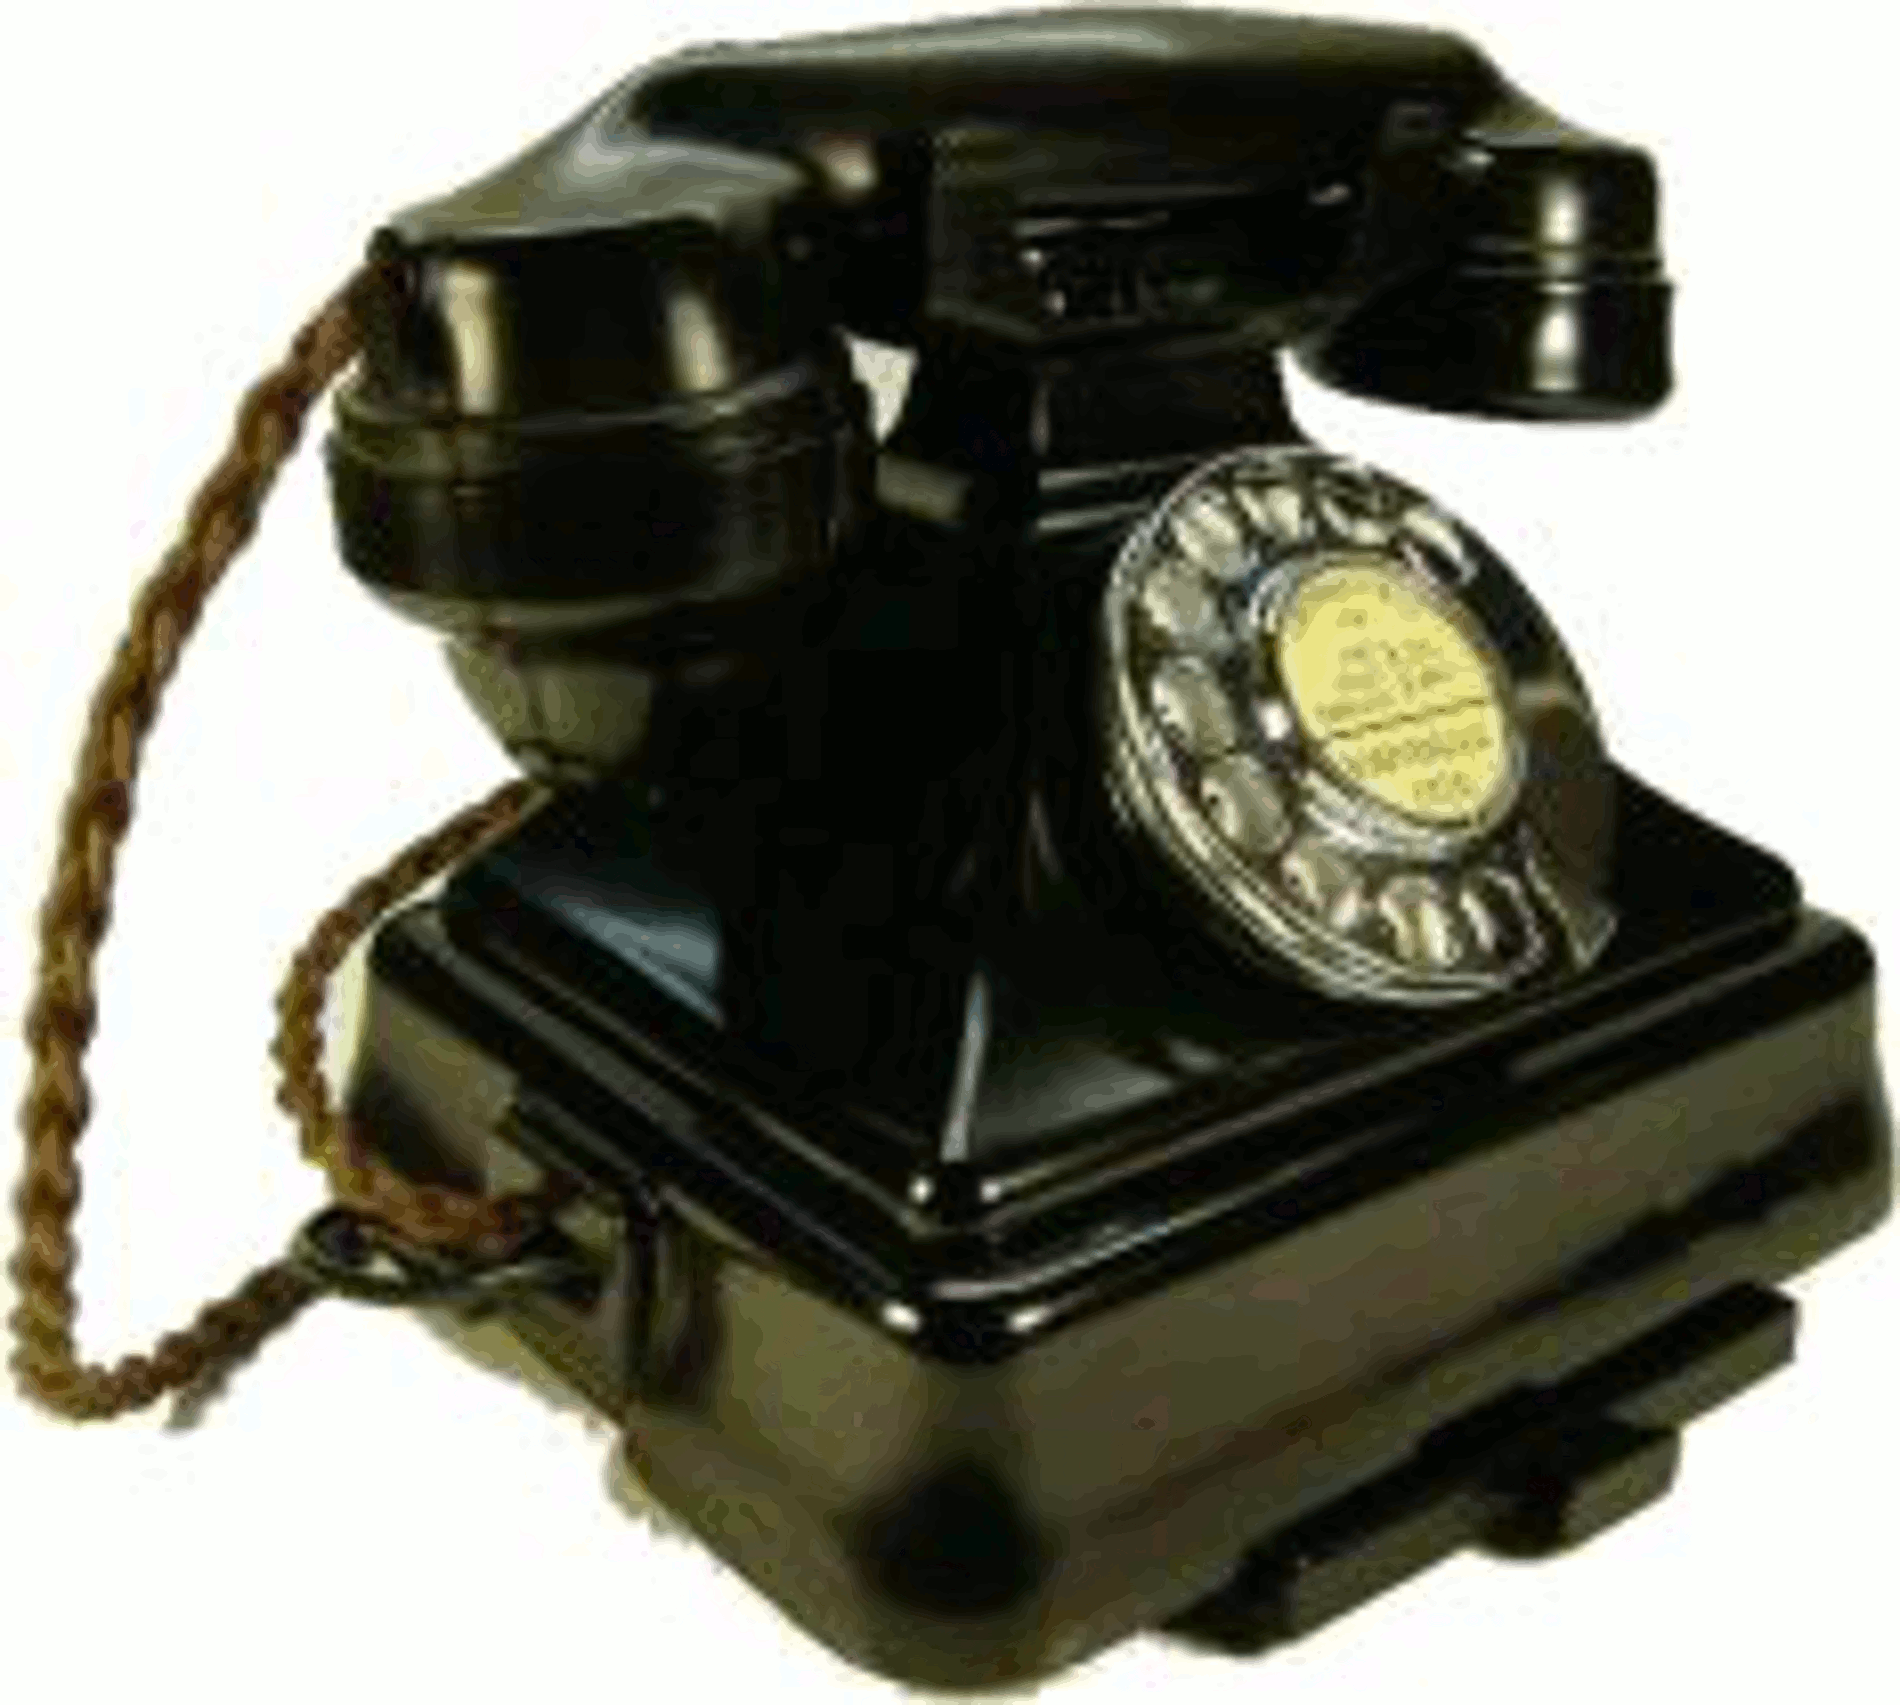 Antique Telephone Restoration (includes conversion and servicing)